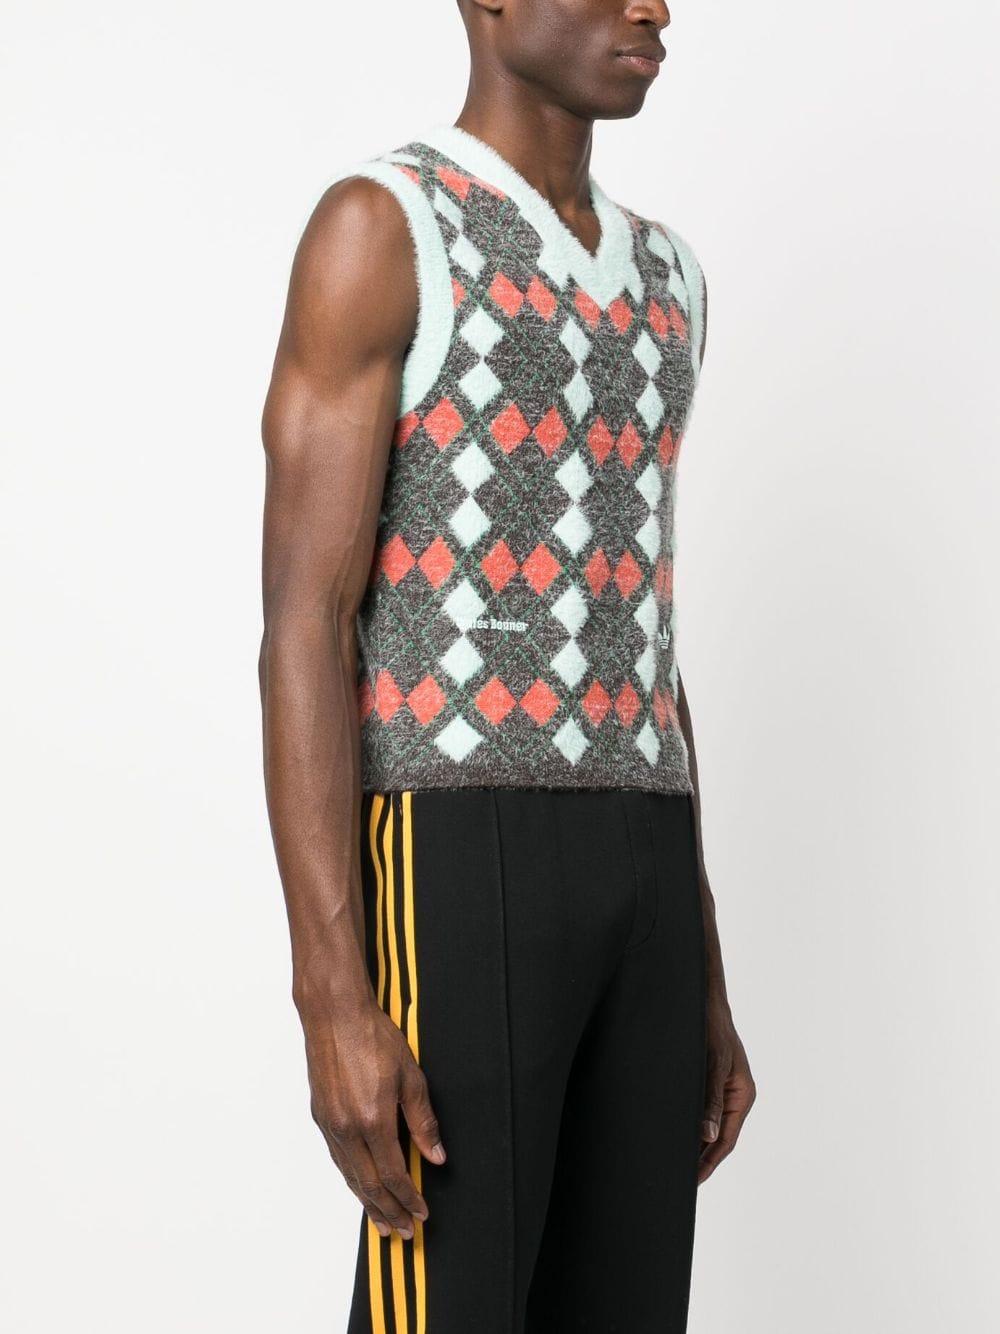 Wales Bonner X Adidas Argyle-pattern Knitted Vest Top in Gray | Lyst